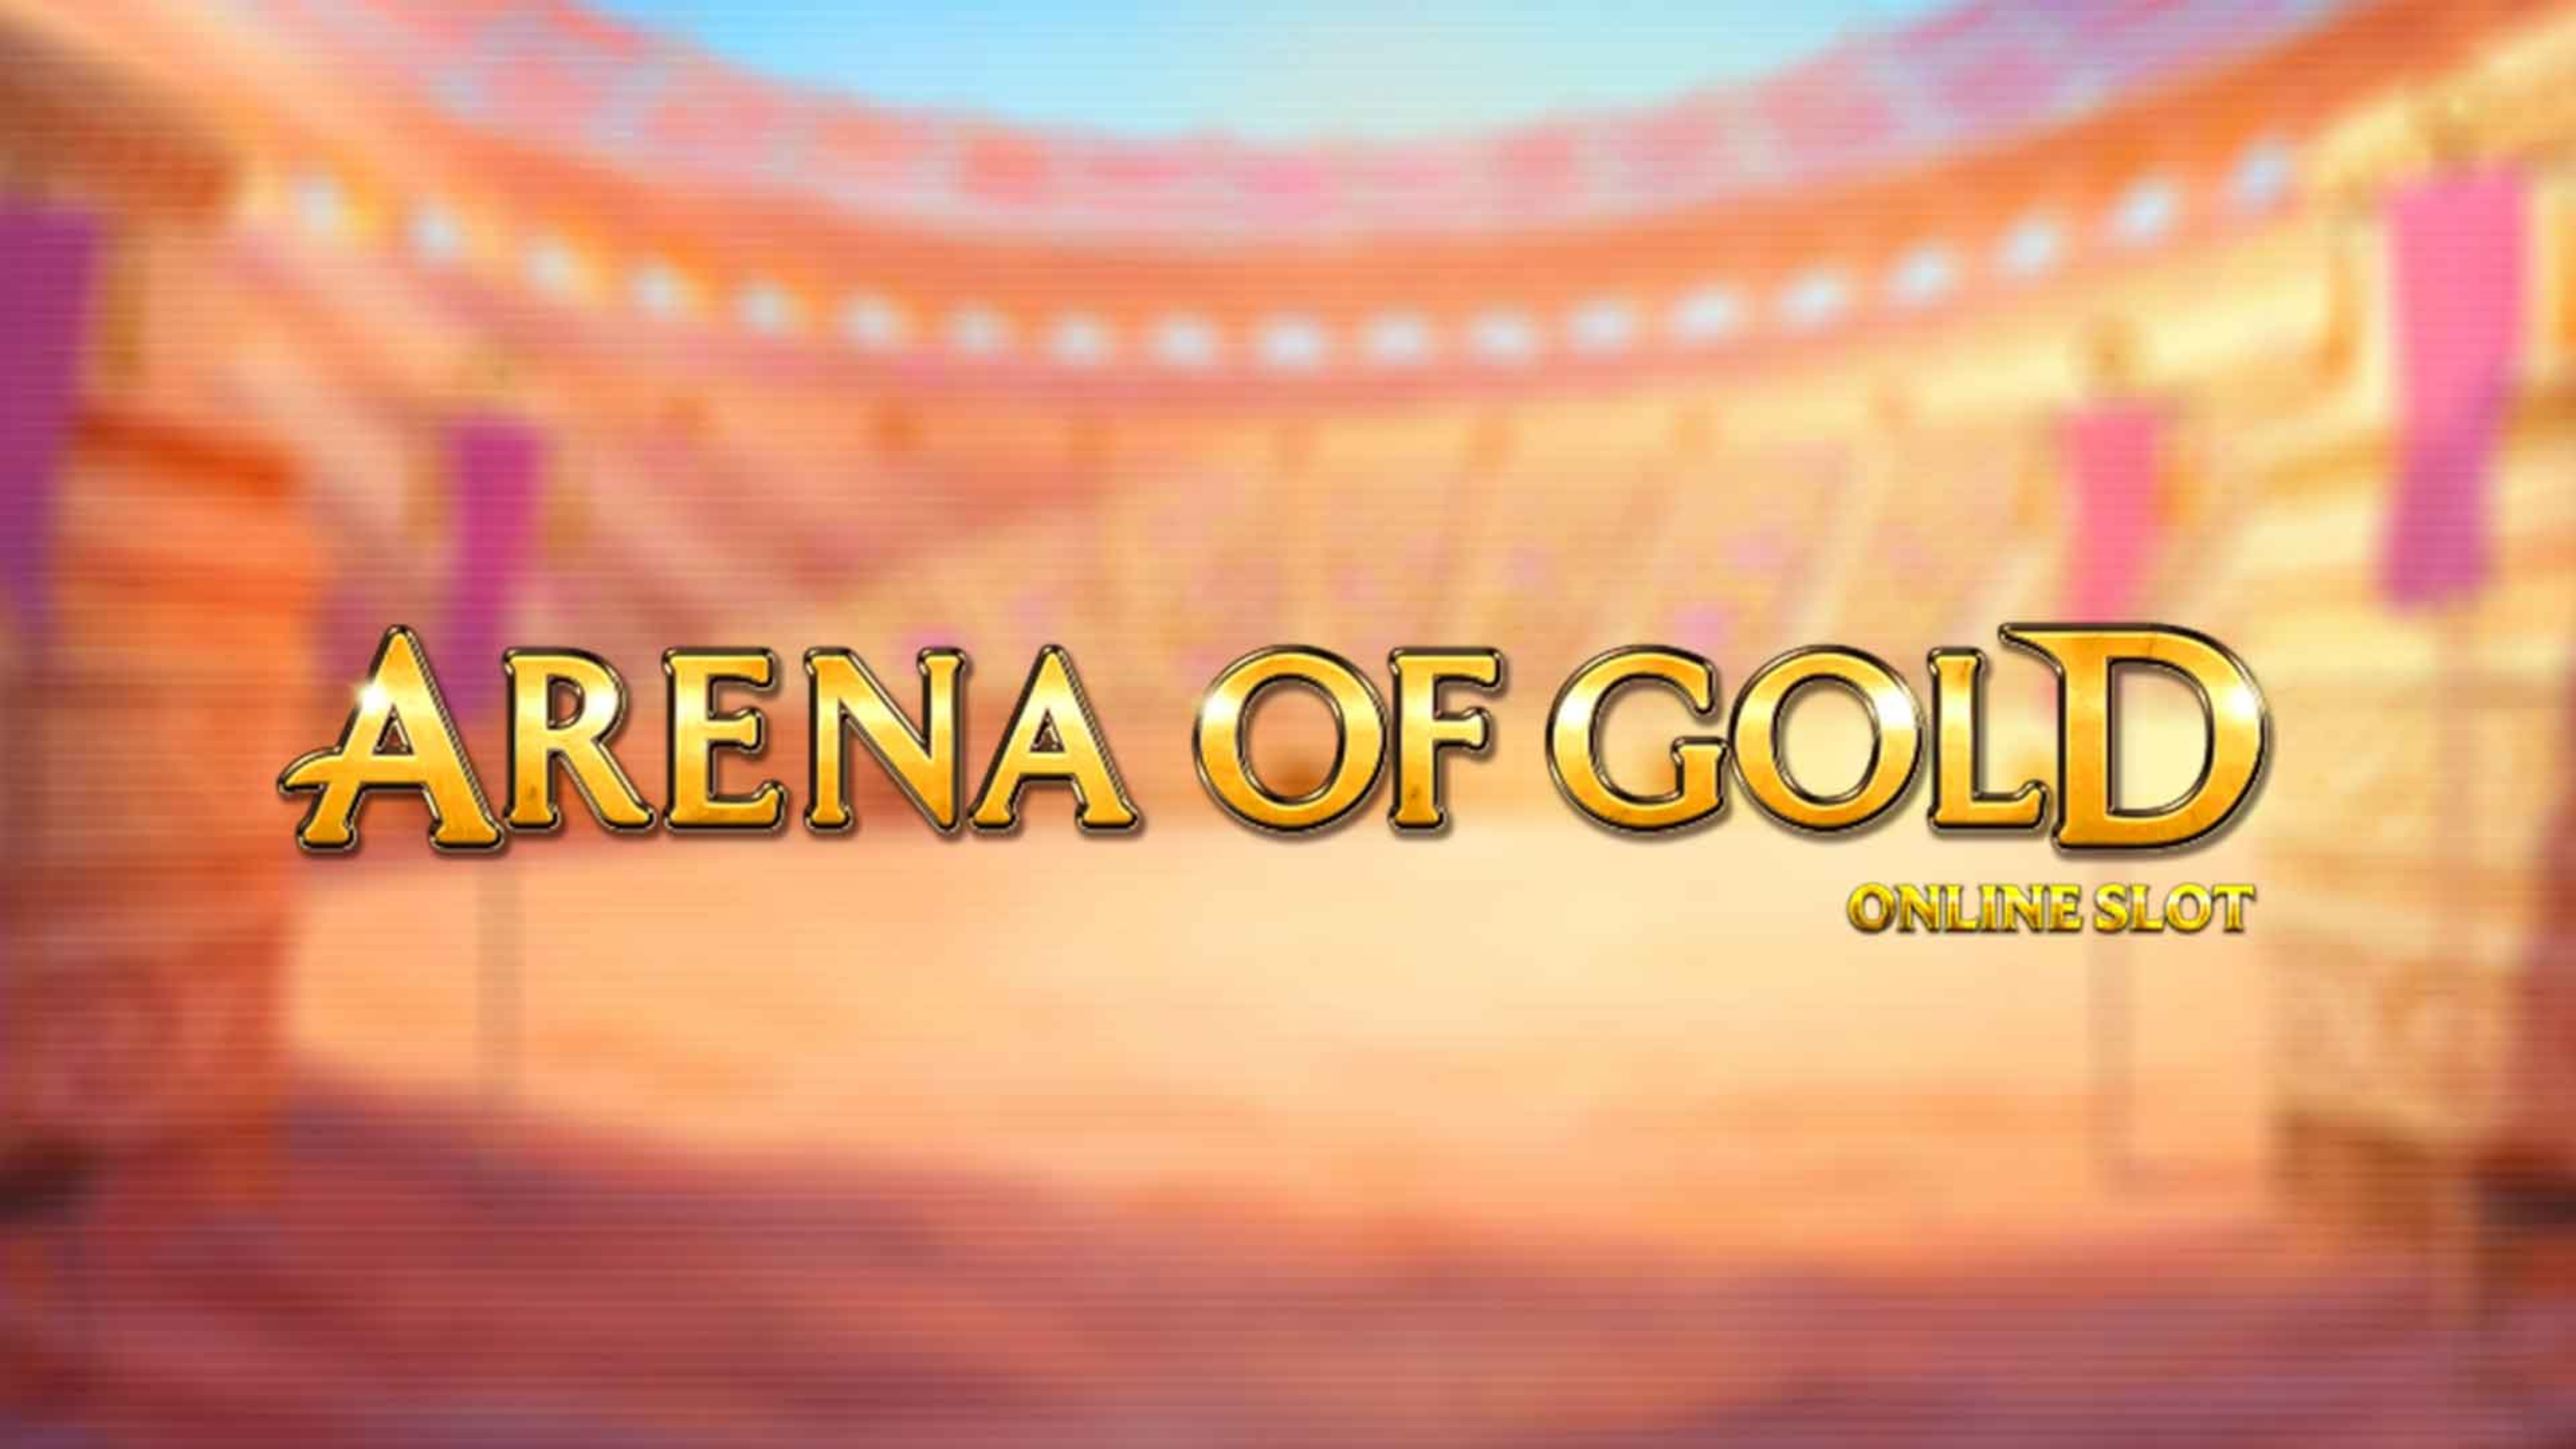 Arena of Gold demo